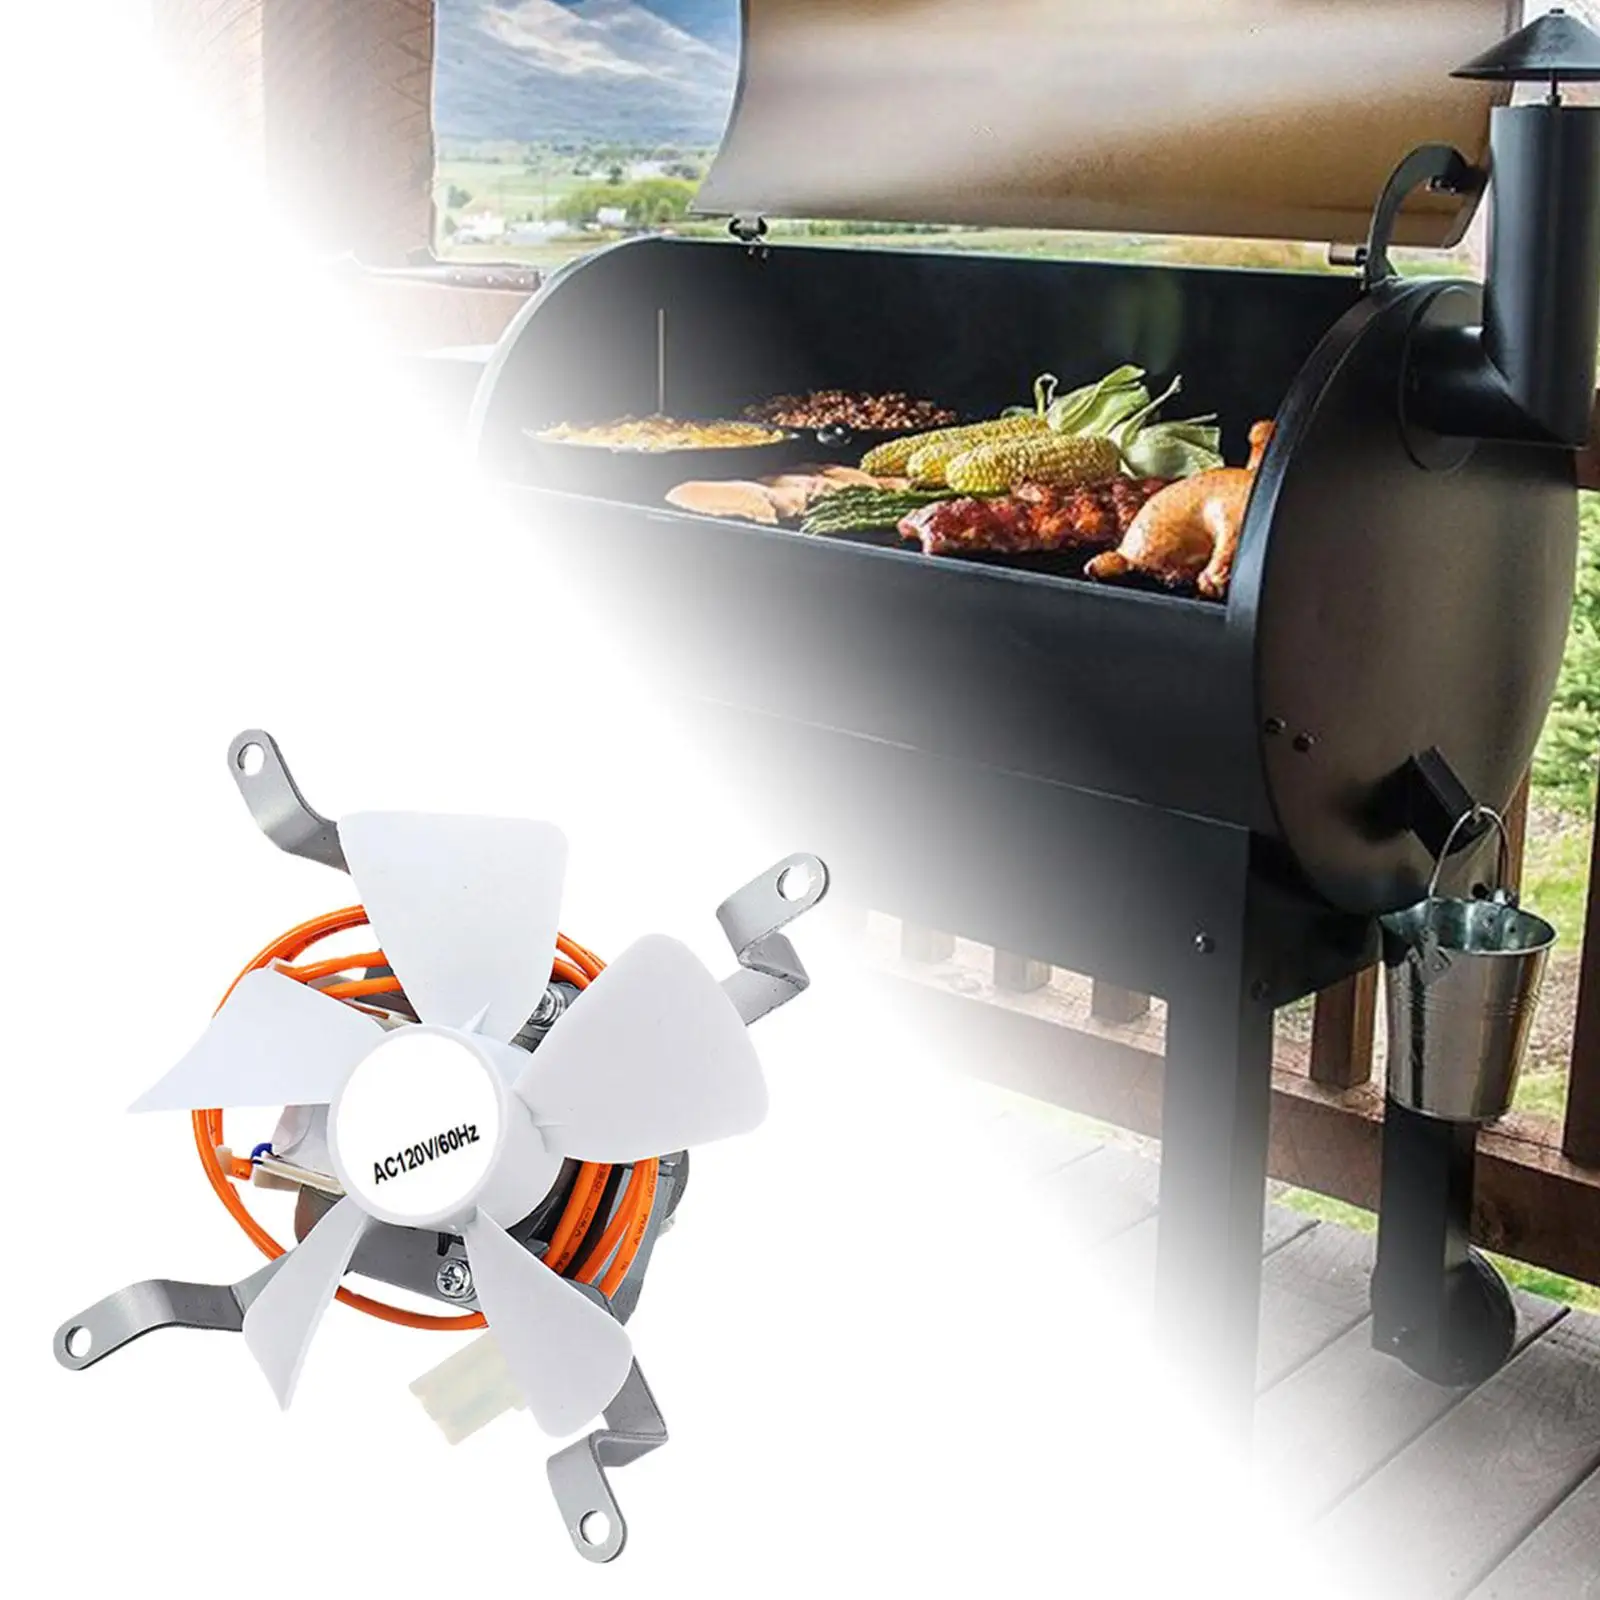 Grill Induction Fan Easily to Install Low Noise and Low Vibration 60Hz Portable Combustion Fan Motor Speed 3000RPM Accs Parts